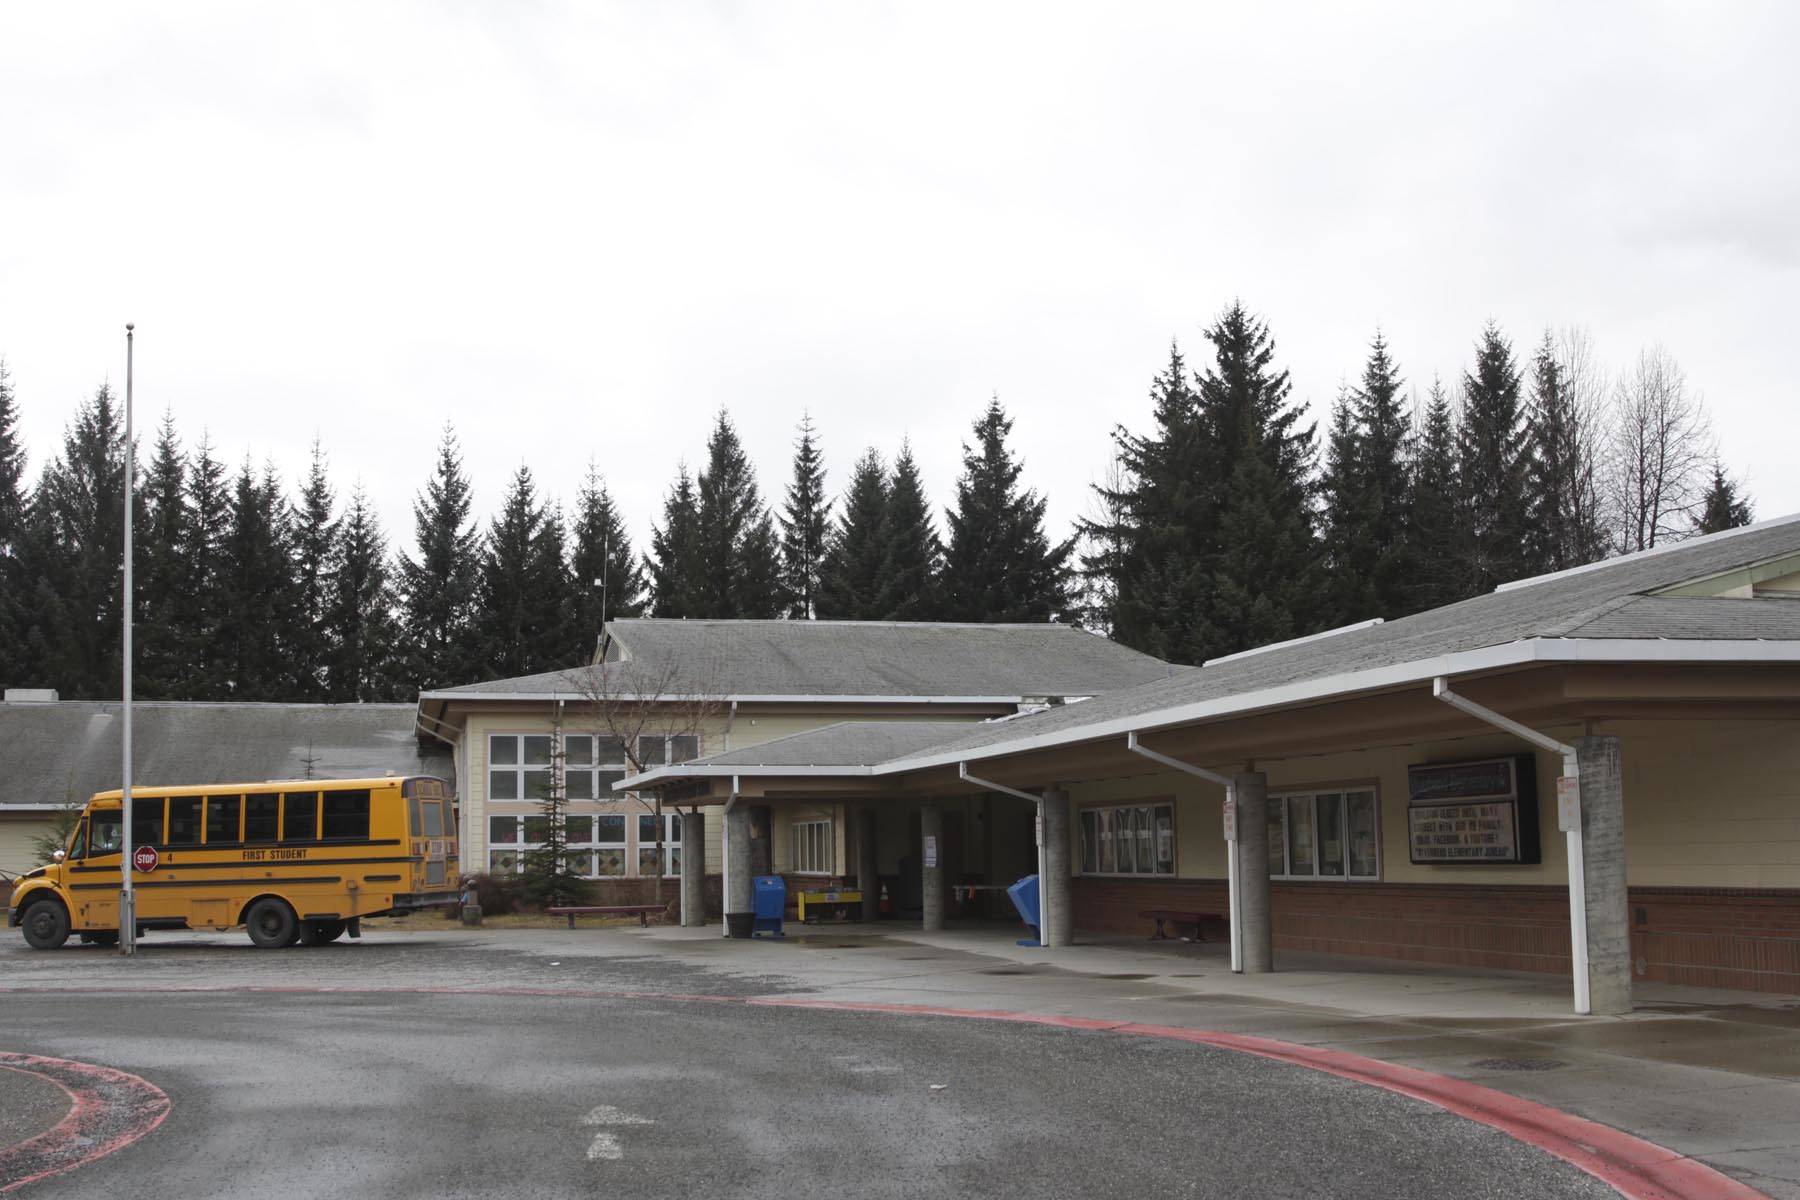 A meal distribution point in front of Riverbend Elementary School, April 7, 2020. (MIchael S. Lockett | Juneau Empire)